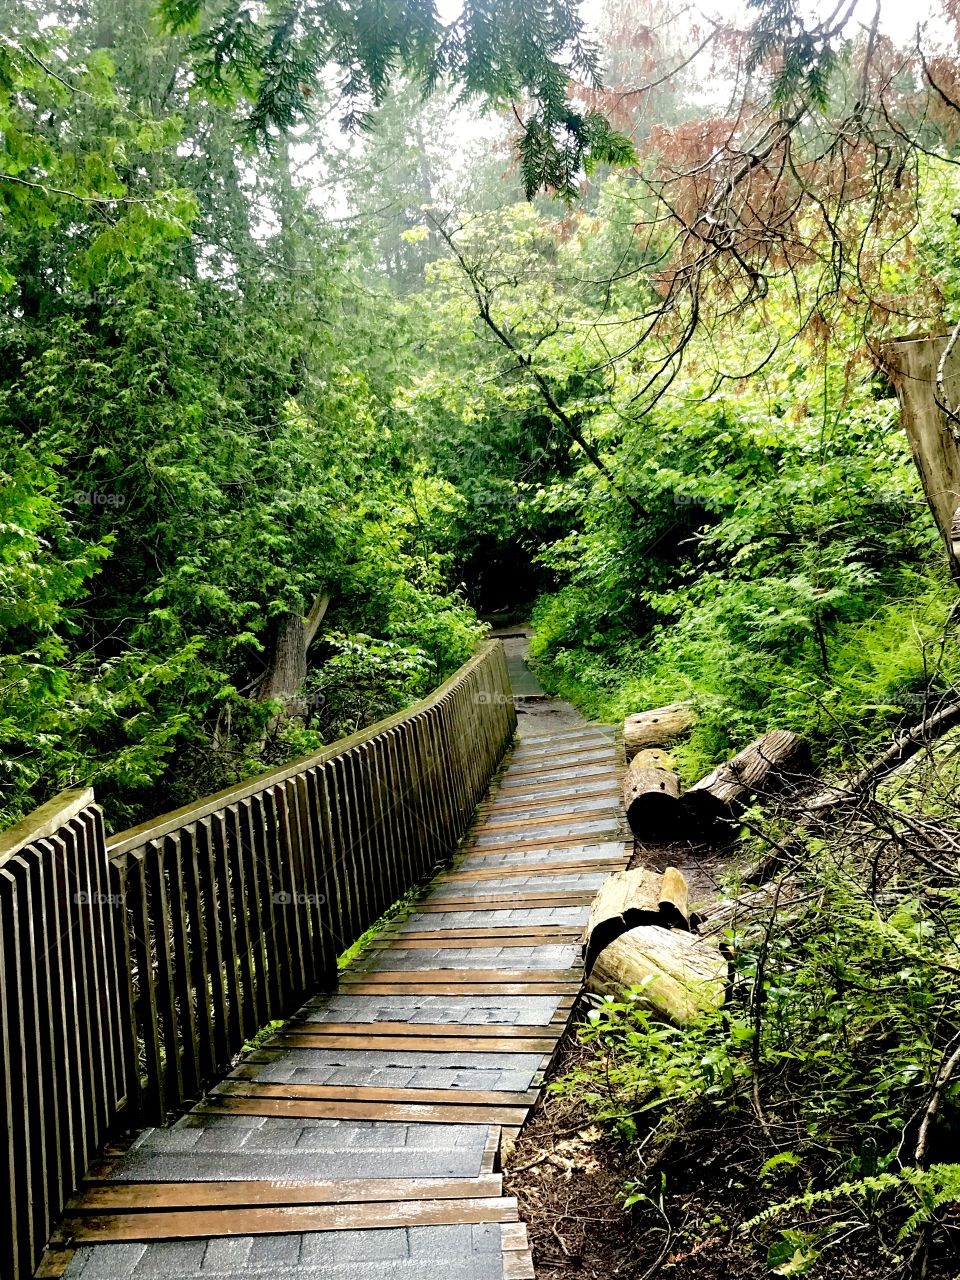 Beautiful wooden path through the wilderness